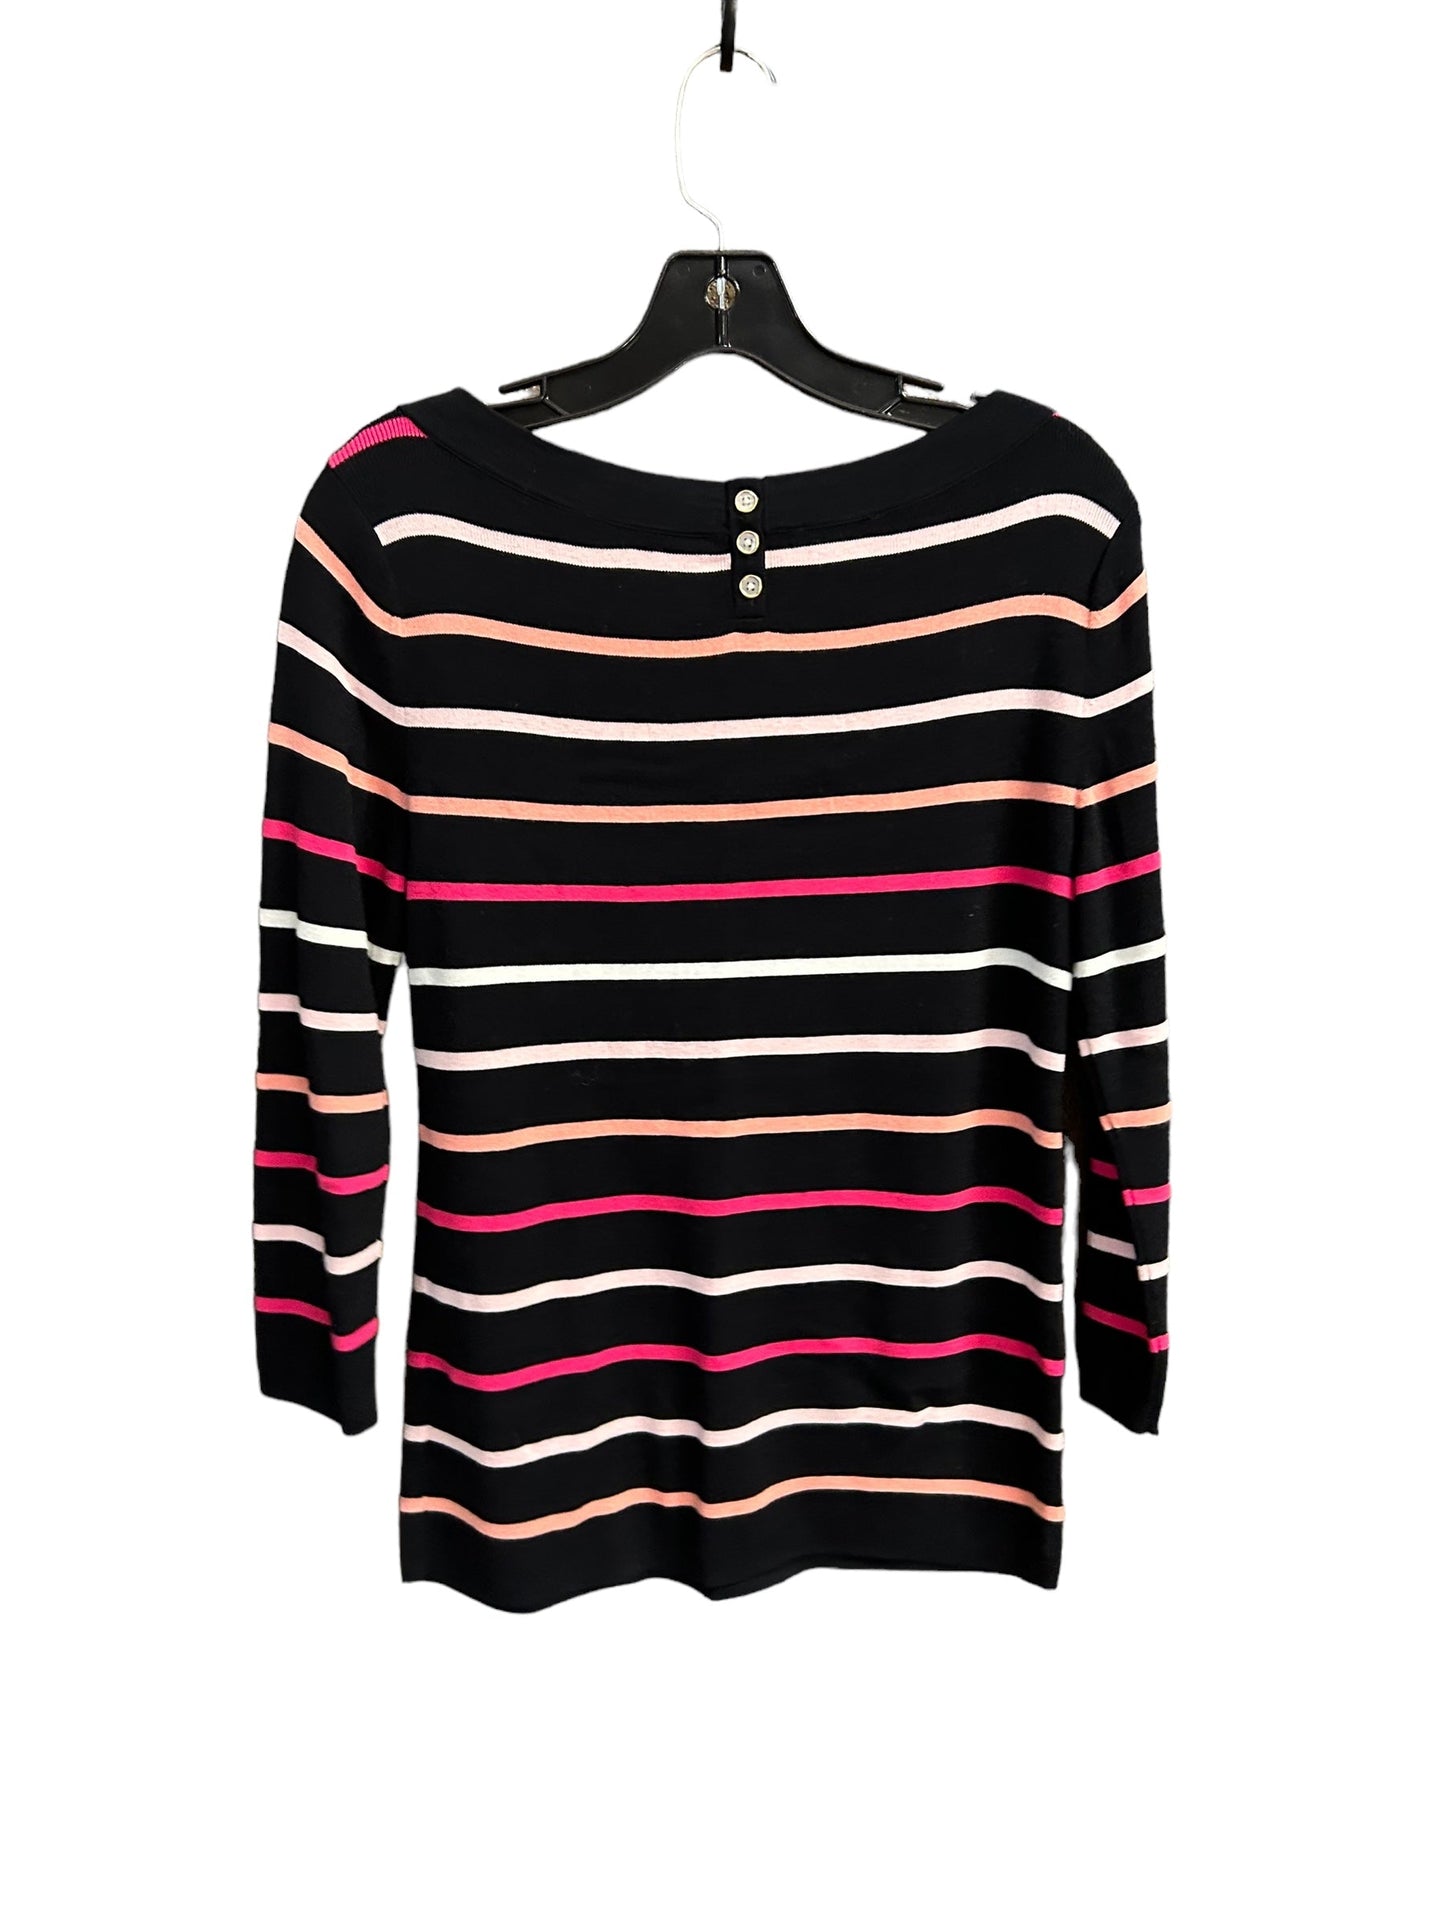 Striped Top 3/4 Sleeve Talbots, Size S